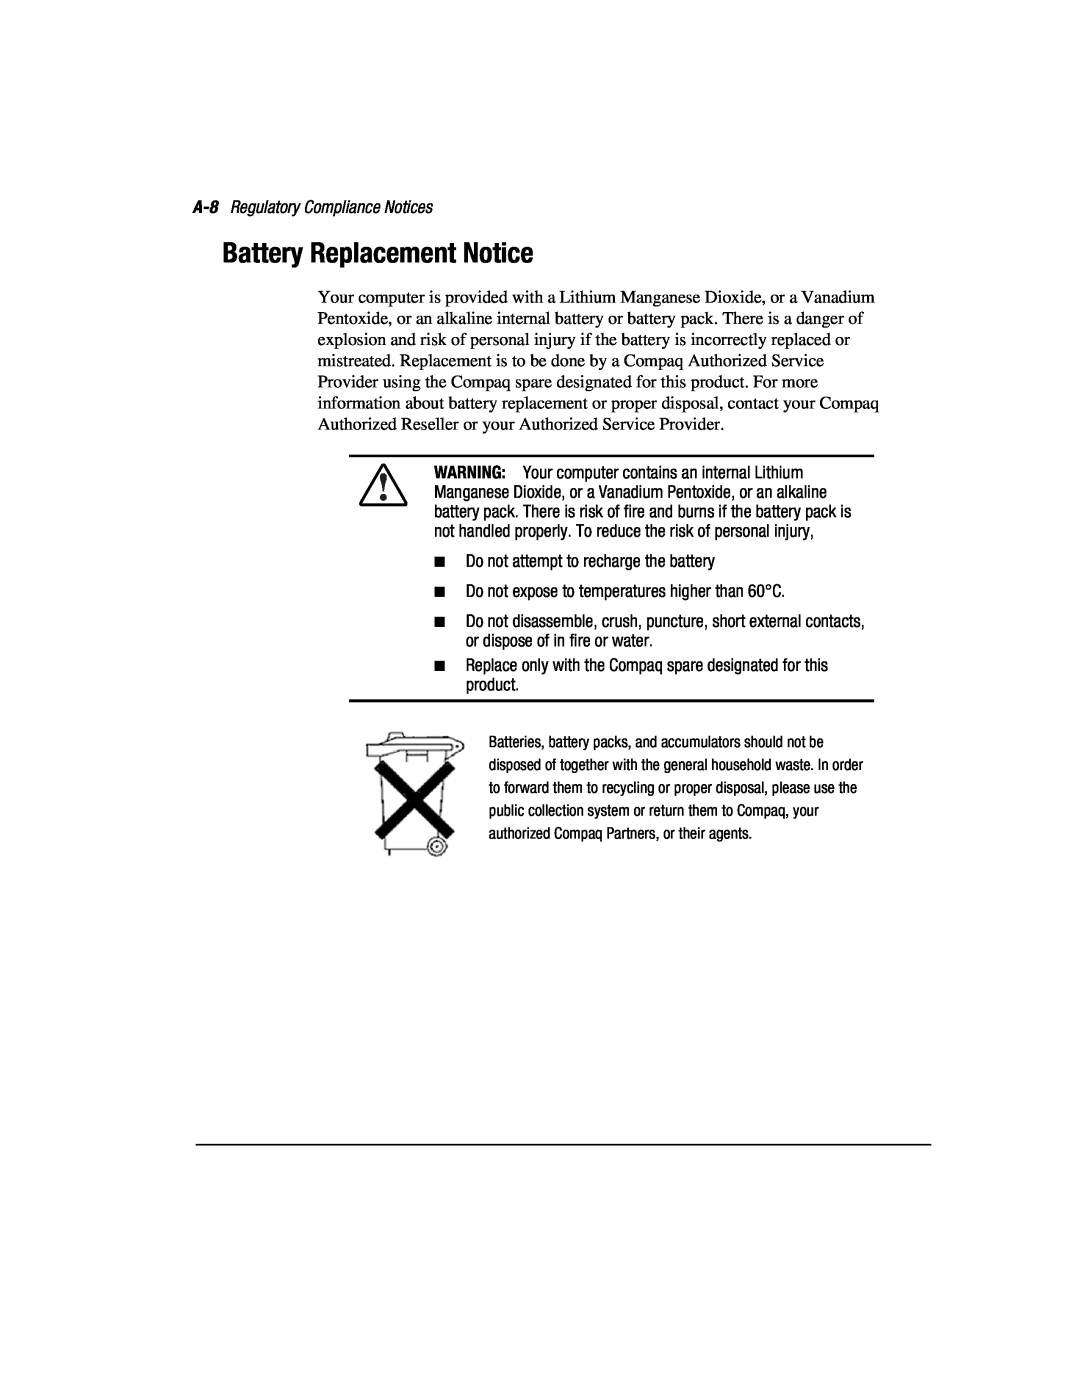 Compaq 3200 manual Battery Replacement Notice, A-8 Regulatory Compliance Notices, Do not attempt to recharge the battery 